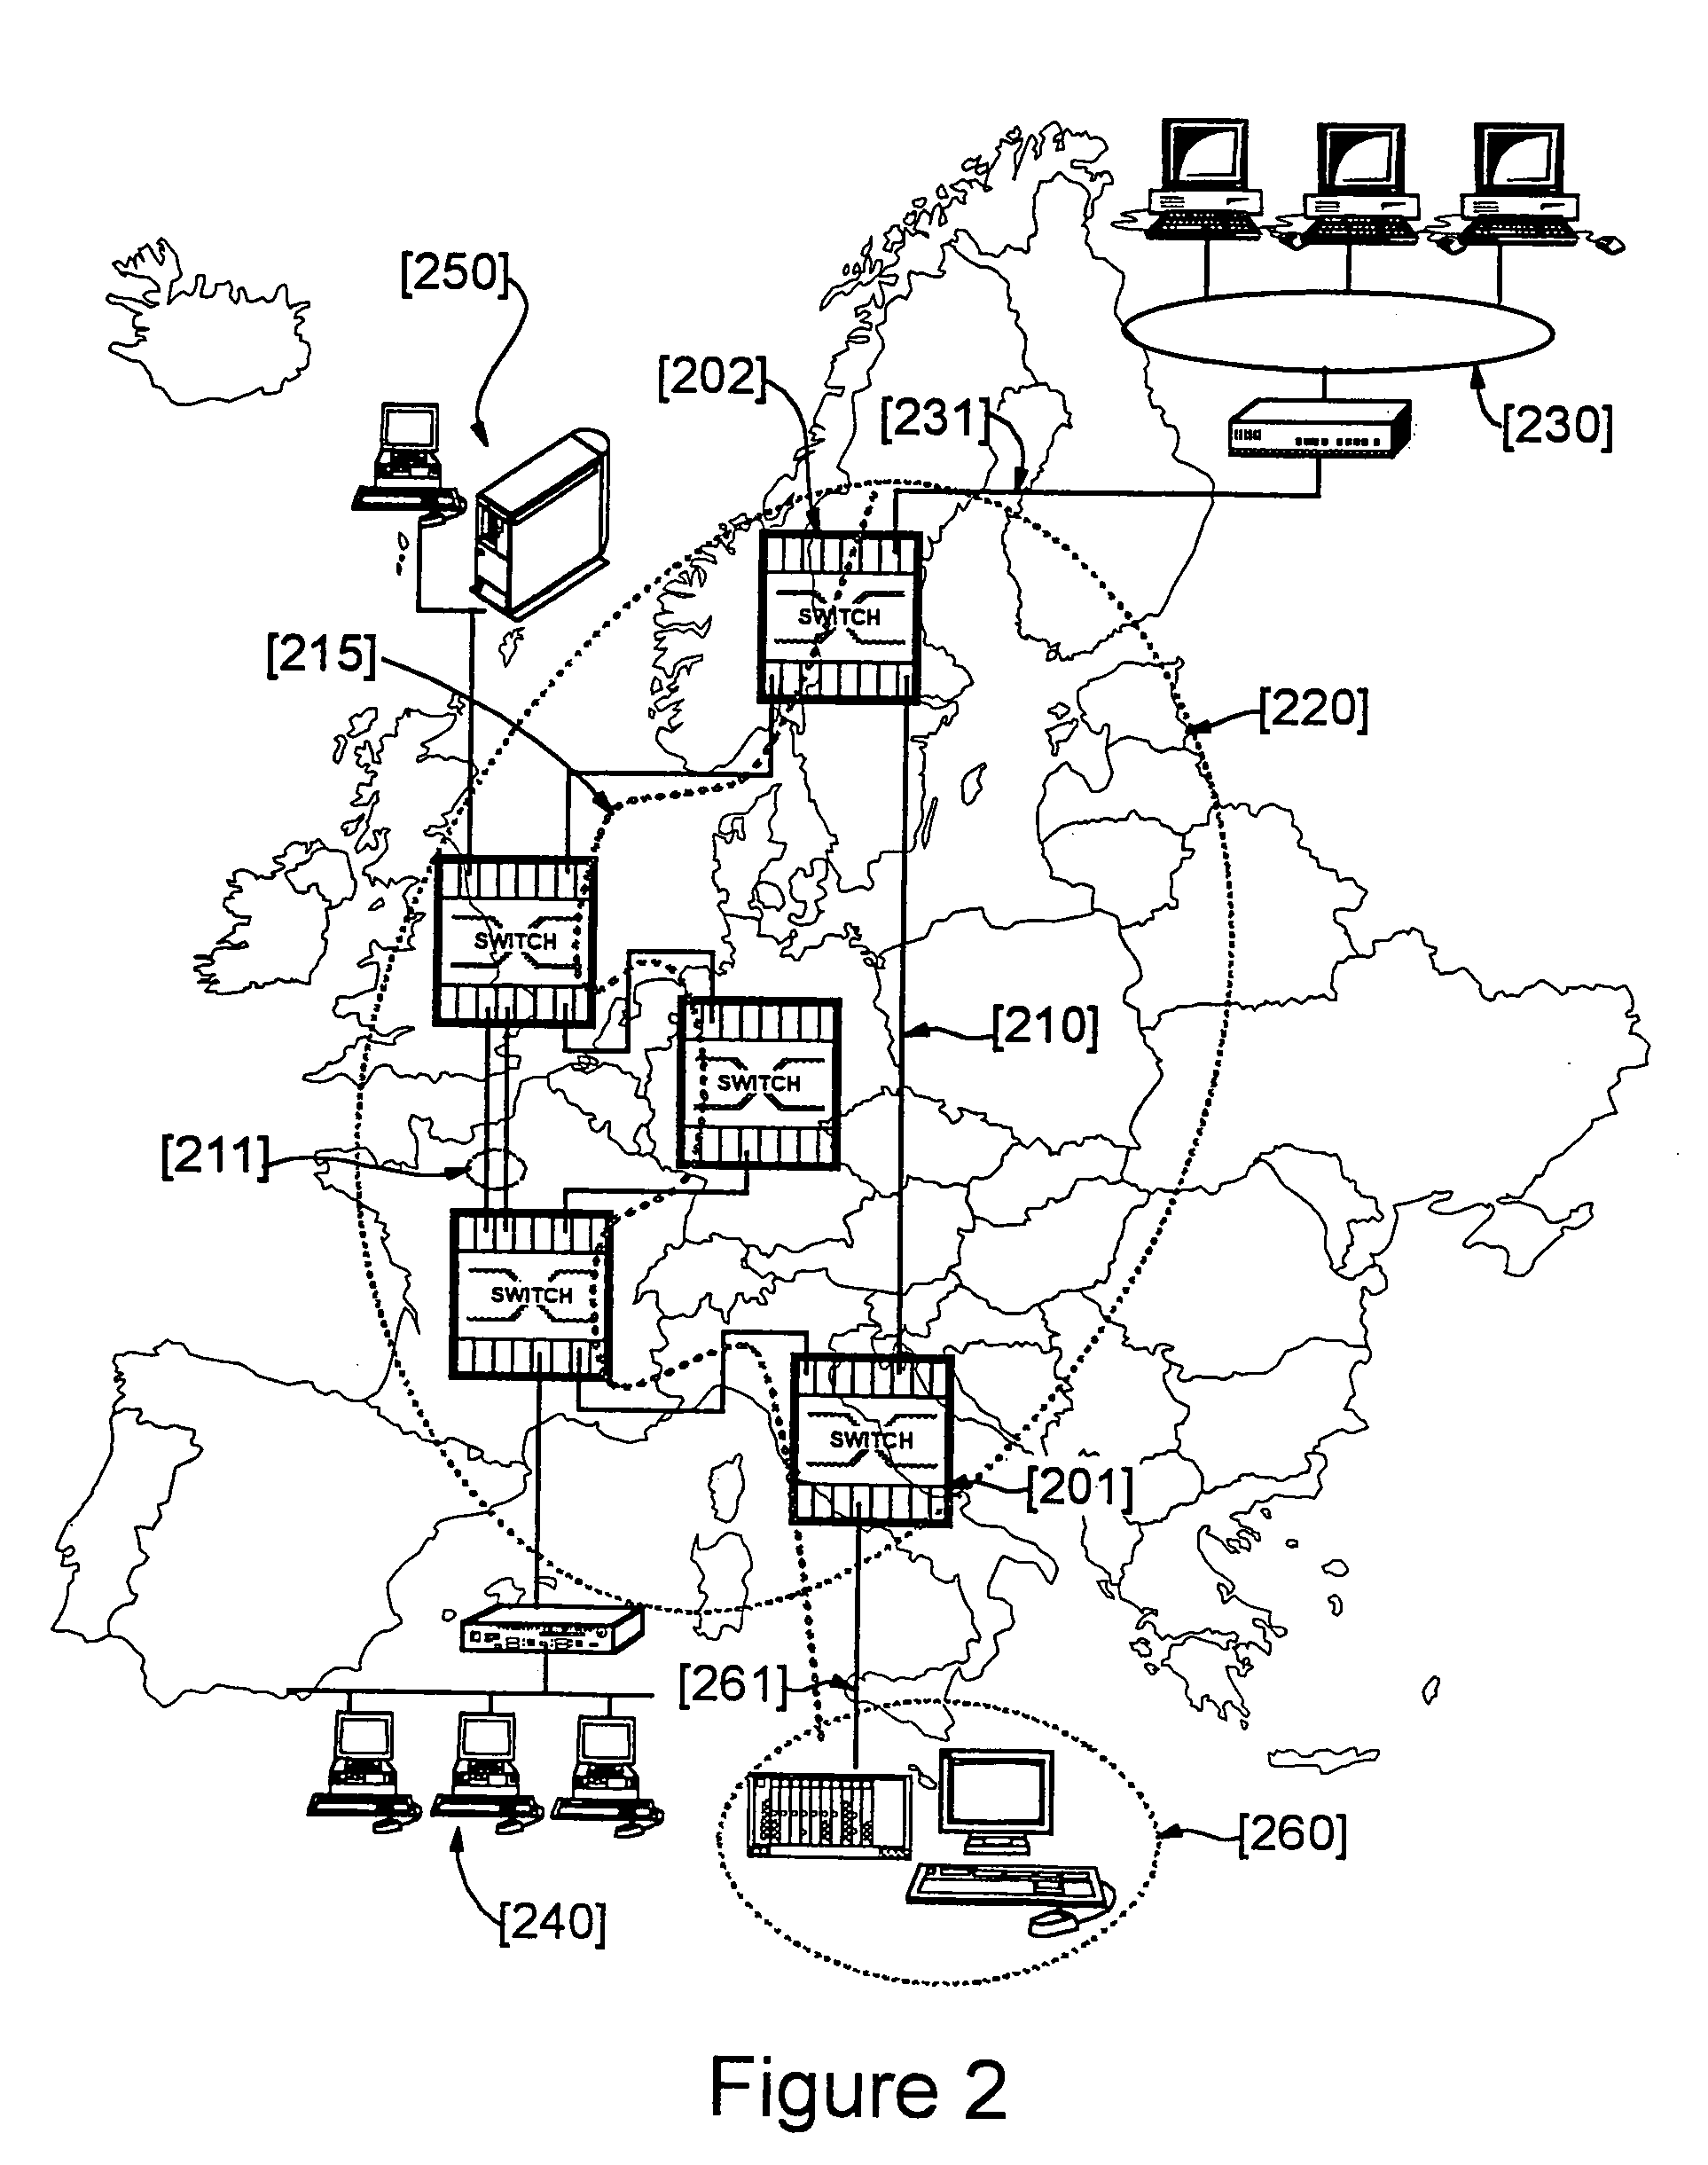 System and method for enabling remote surveillance of ATM network switching node ports